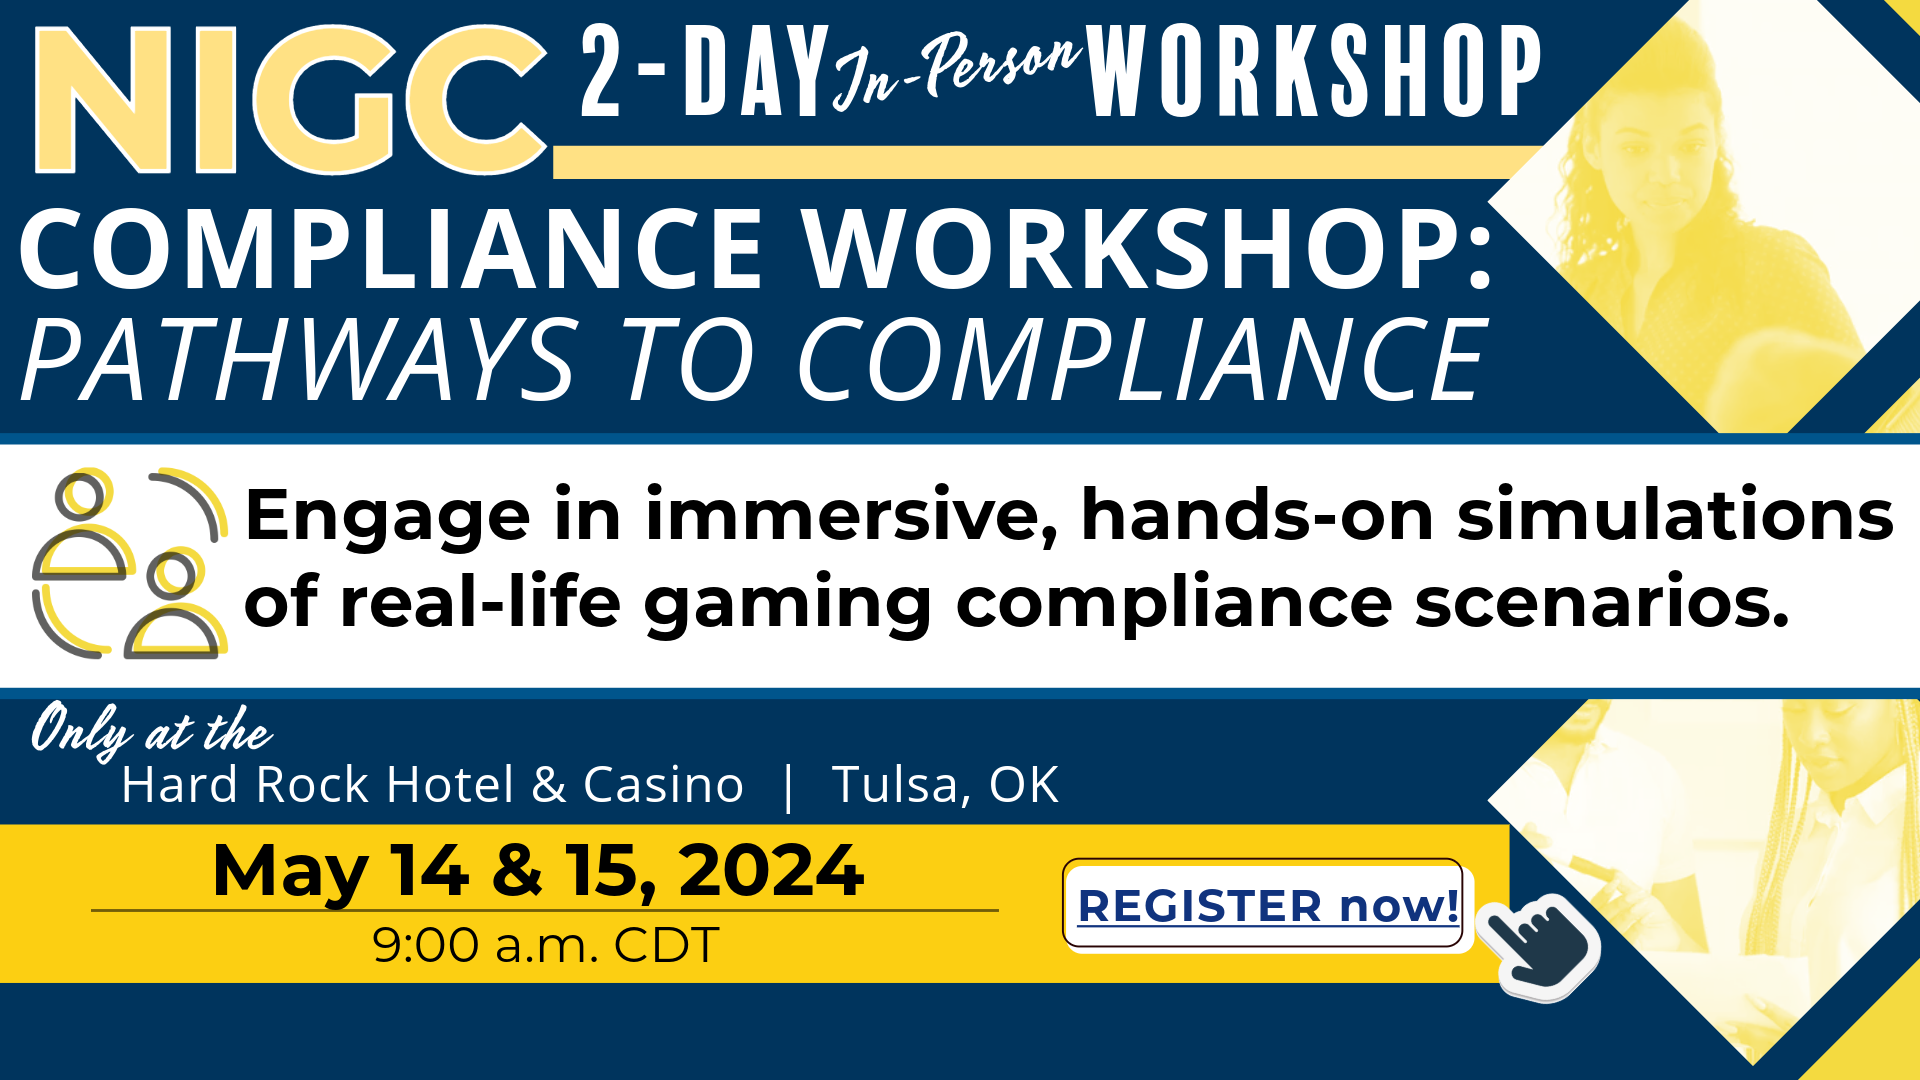 NIGC 2-Day In-Person Compliance Workshop: Pathways to Compliance